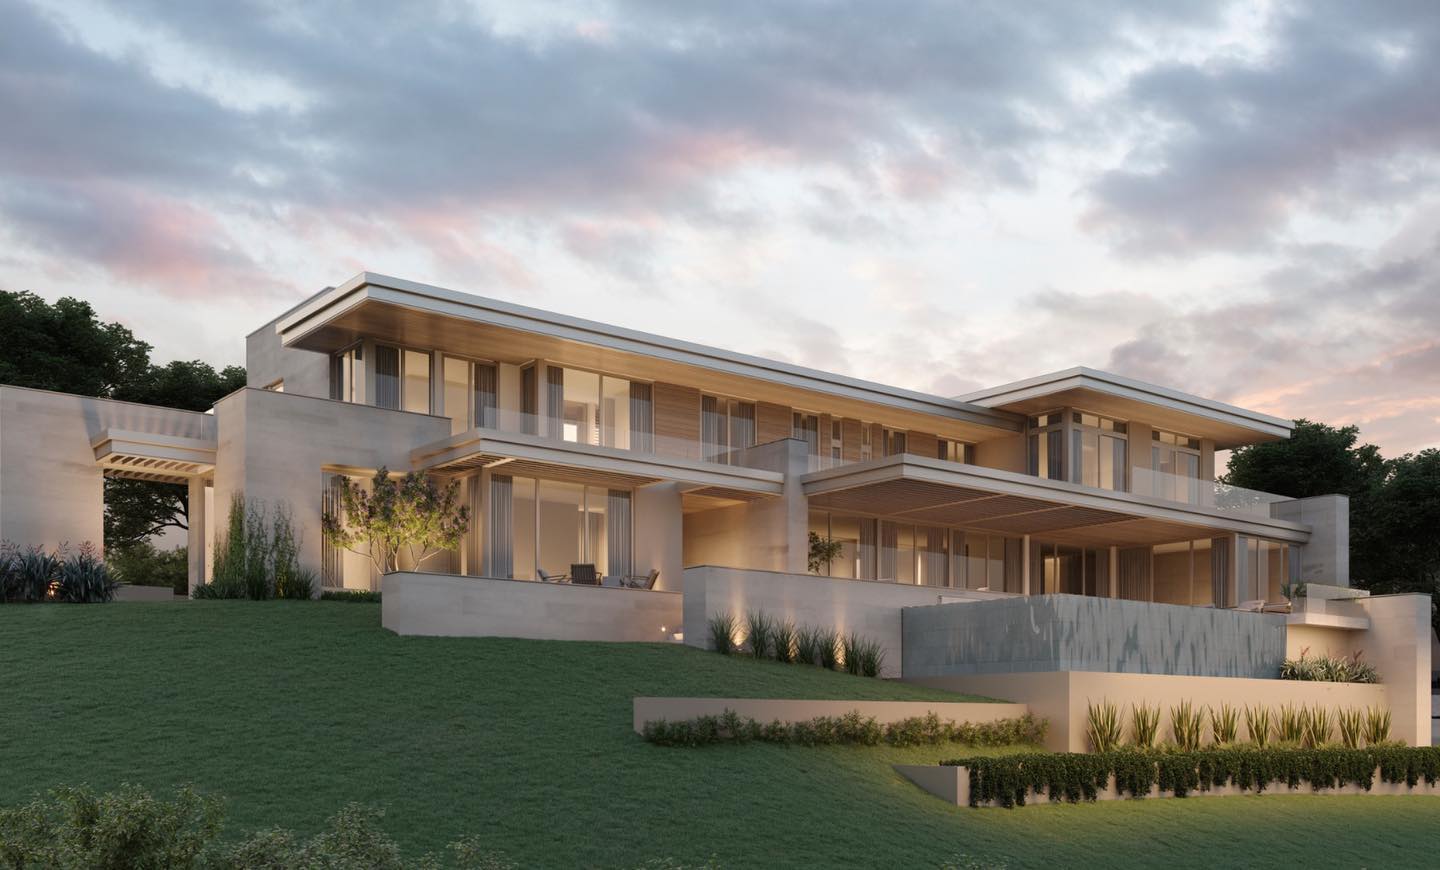 Working in collaboration with @pozas_arquitectos and @michaelwesandco design lead by @deehudockova we’re soon to launch this beautiful hilltop home in West Austin overlooking Mt. Bonnell and Lake Austin.